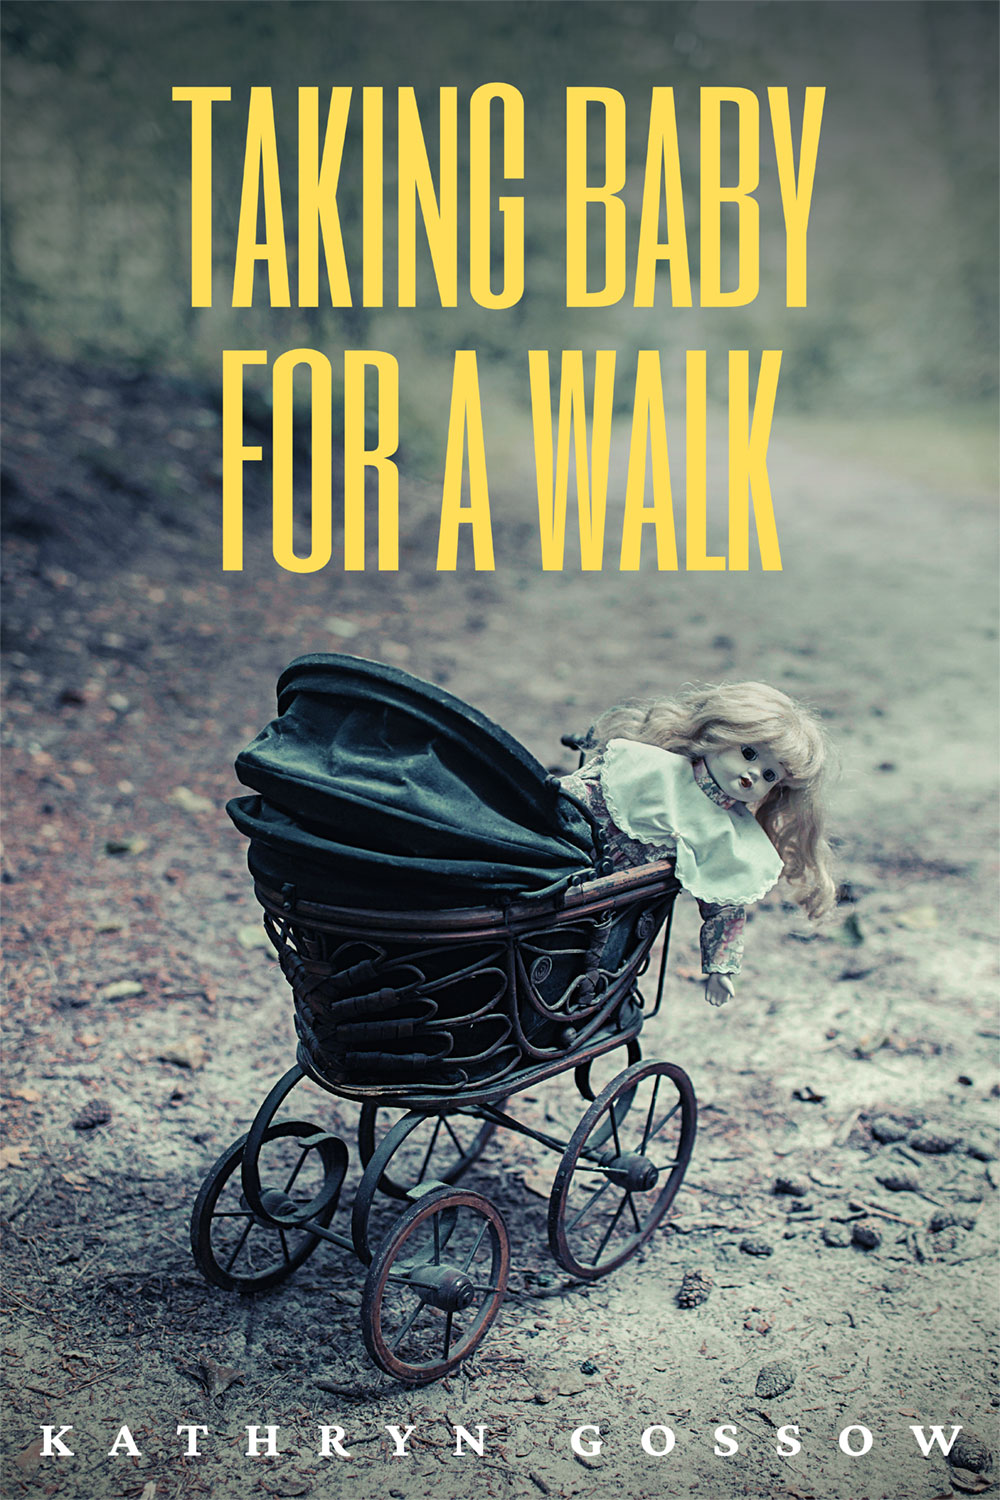 Small Town Living in Gossow’s “Taking Baby for a Walk”